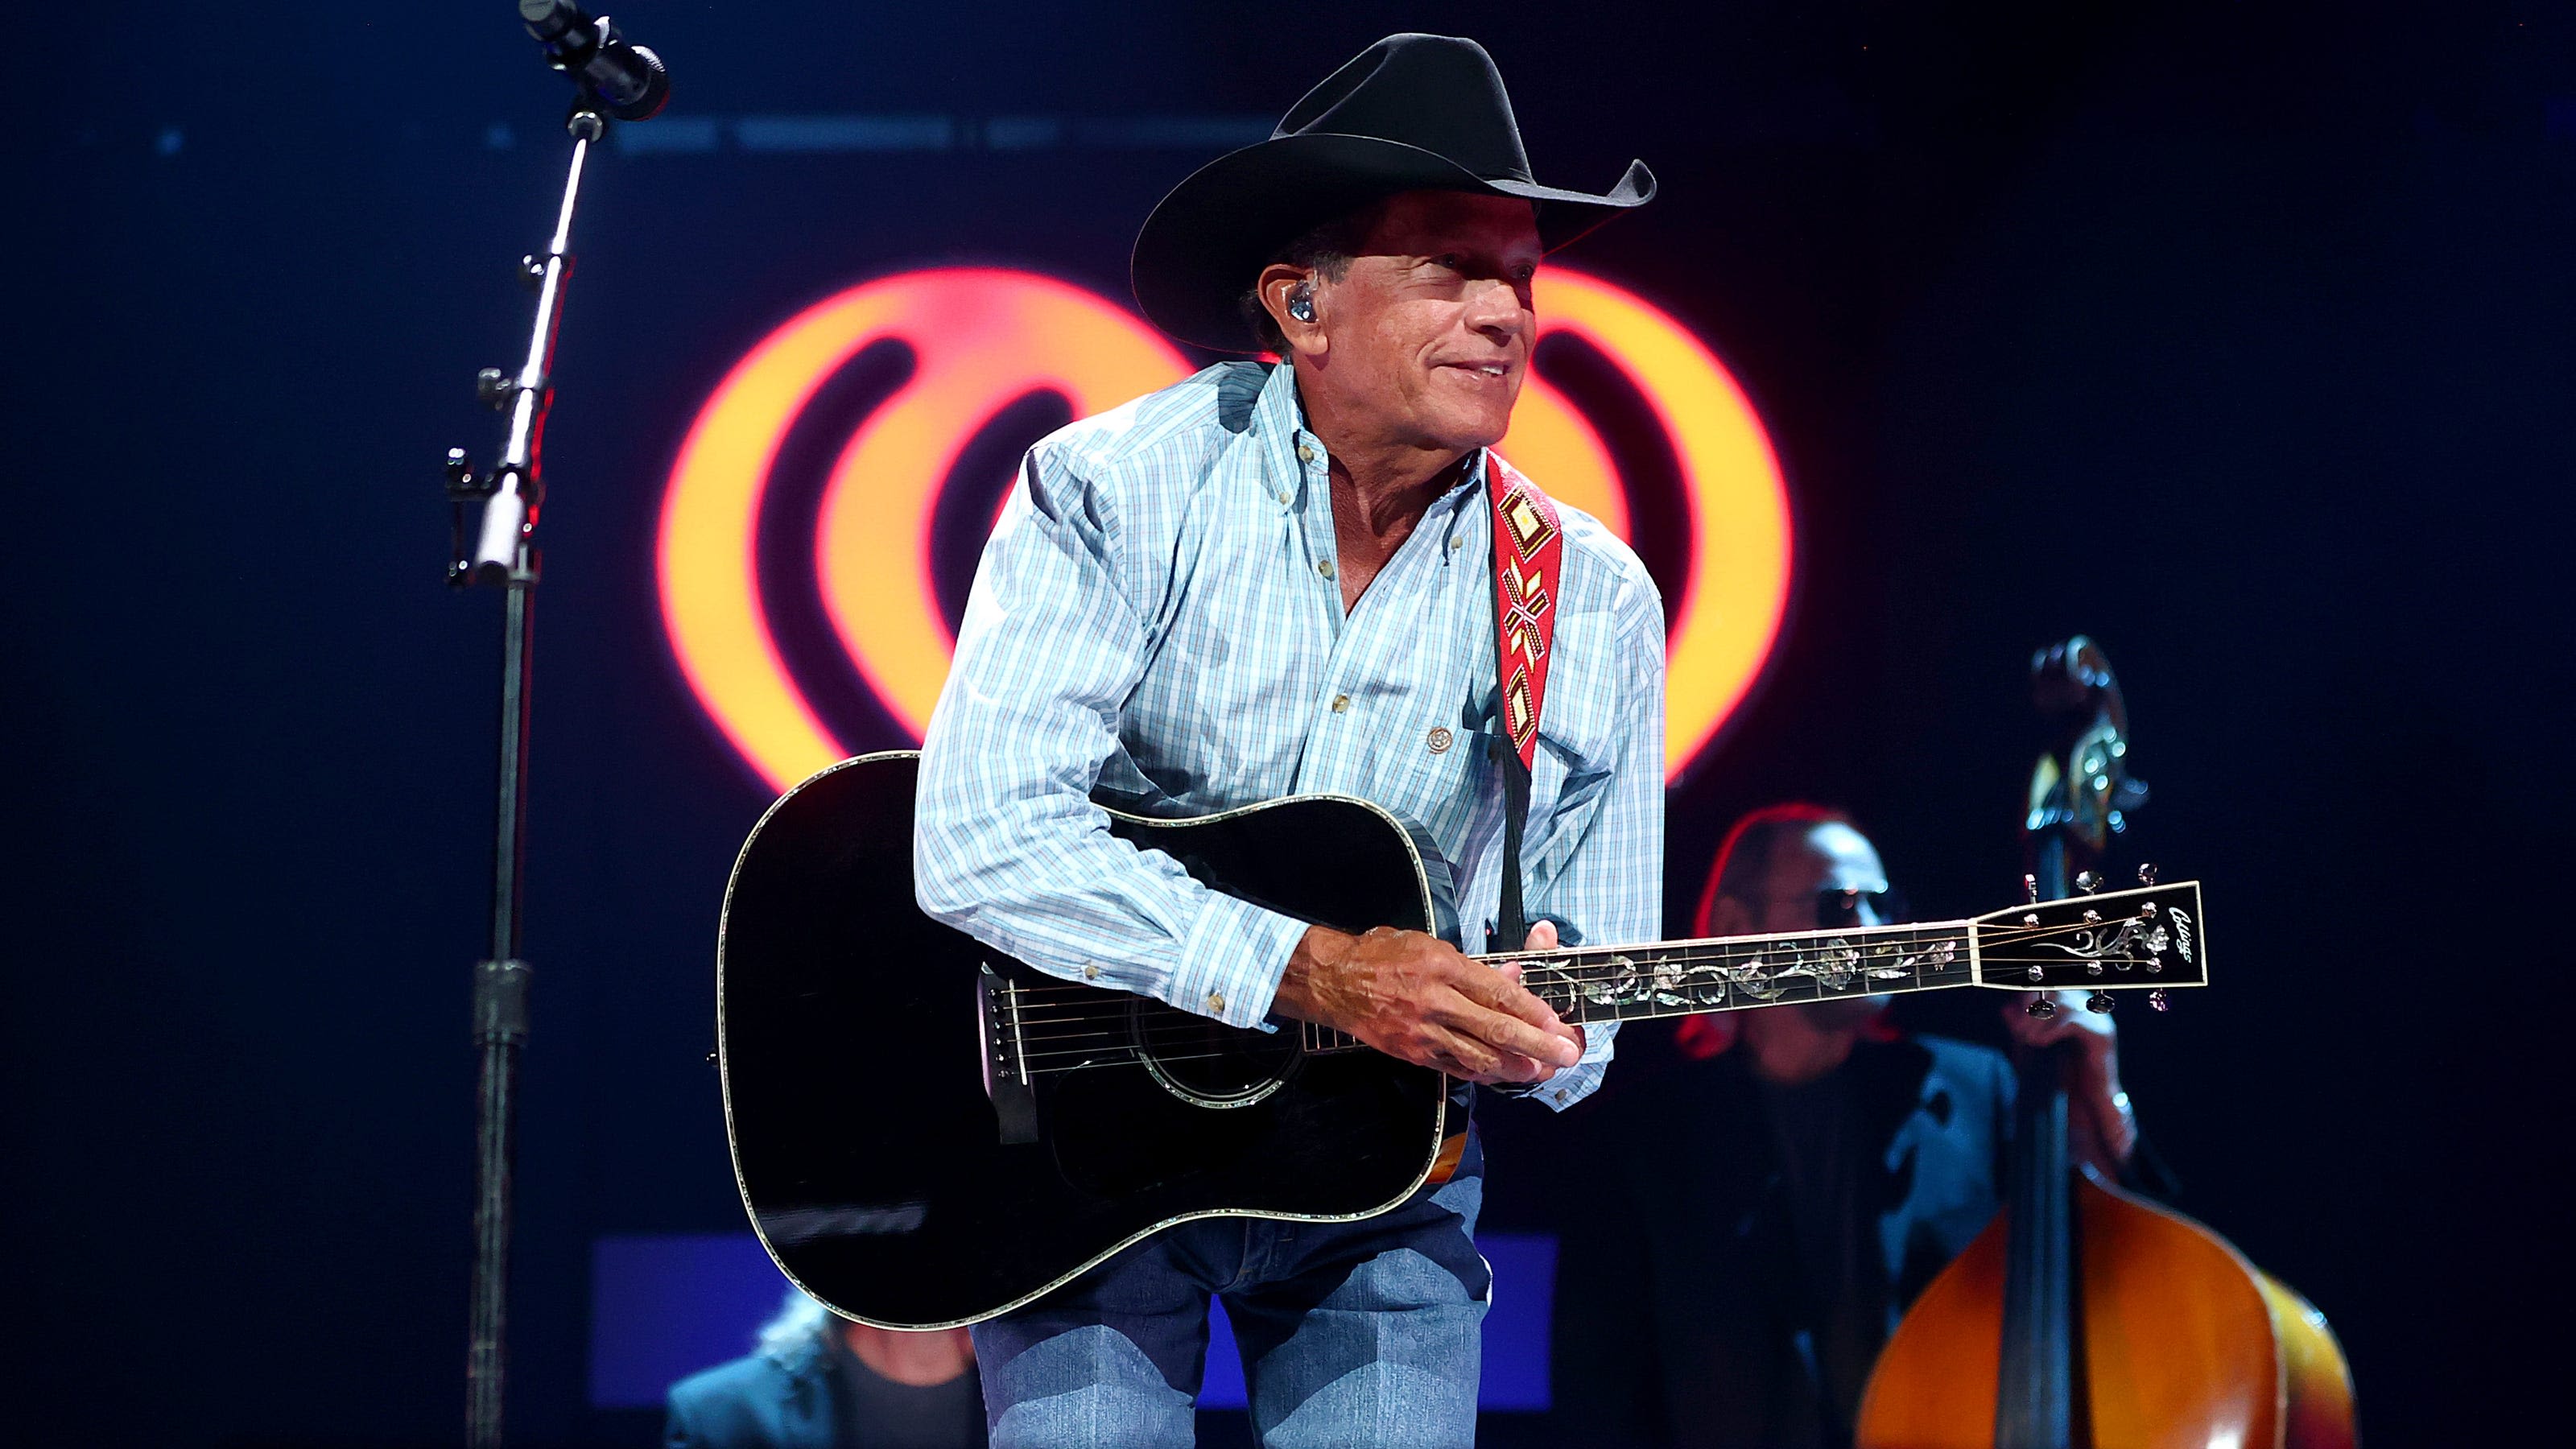 George Strait, Chris Stapleton in concert at EverBank Stadium. Here's what you should know